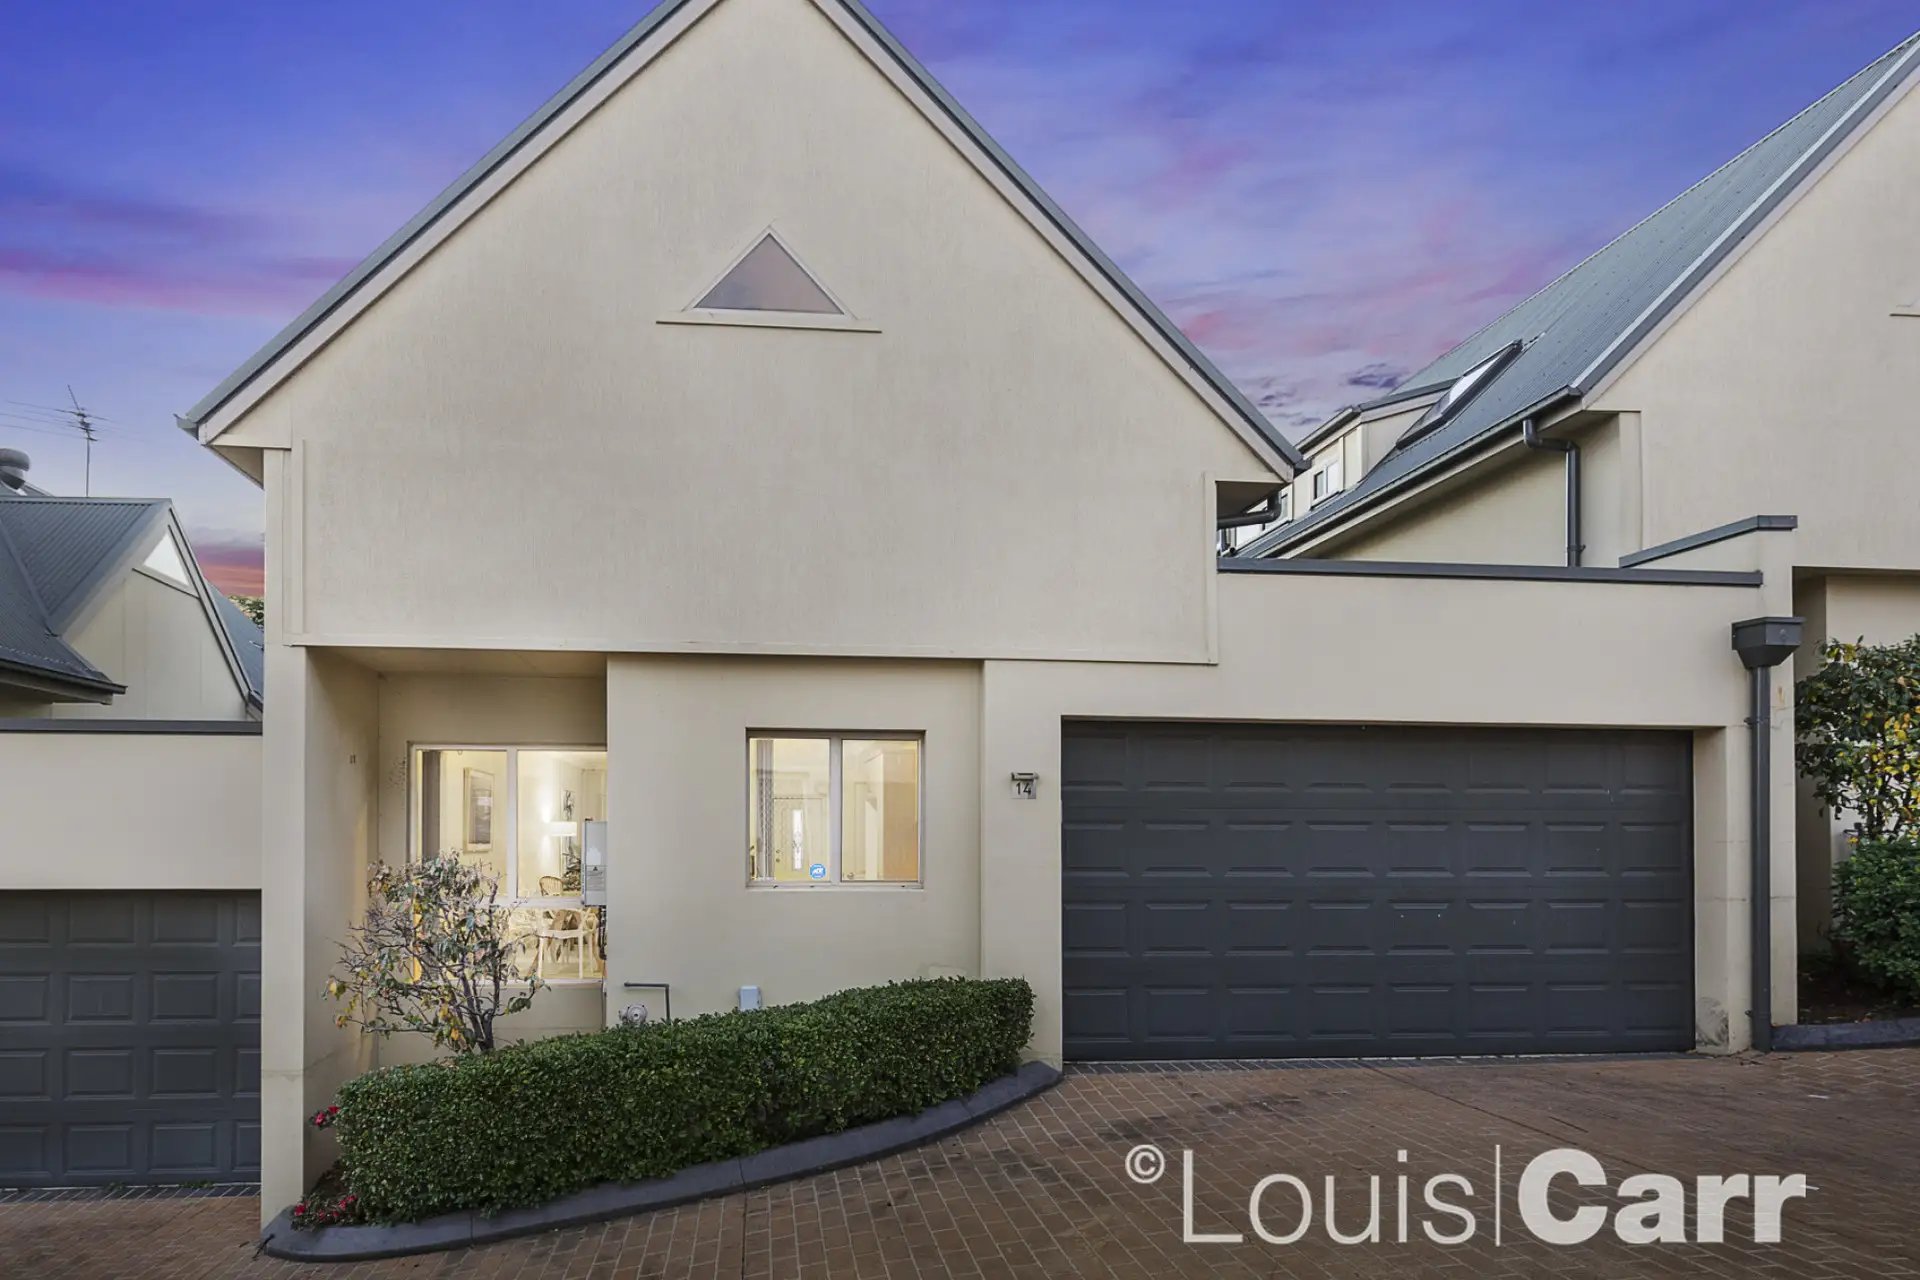 Photo #3: 14/83-93 Railway Street, Baulkham Hills - Sold by Louis Carr Real Estate